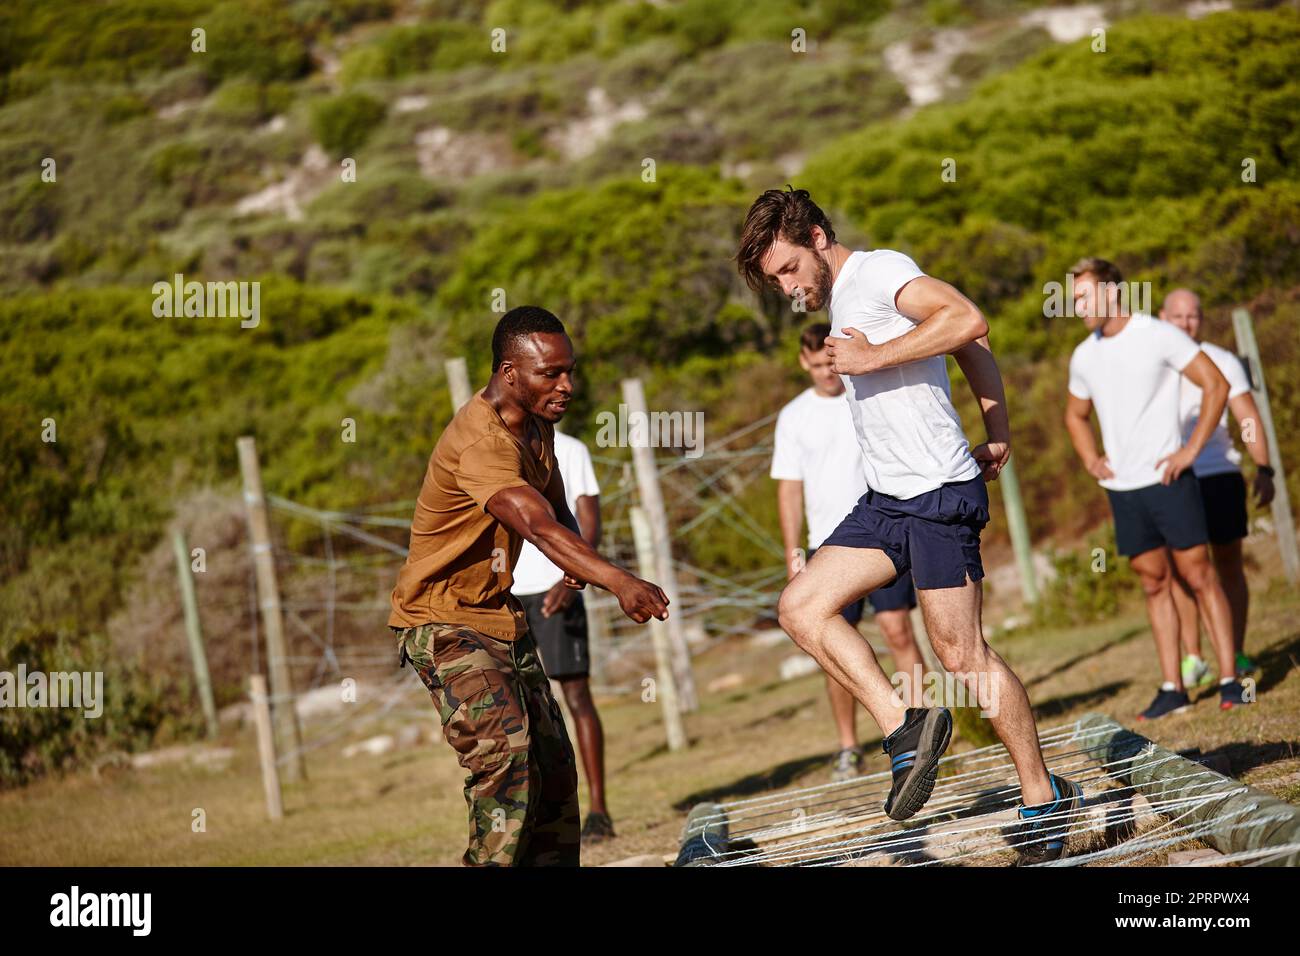 Set some goals, then demolish them. a group of men doing drills at a military bootcamp. Stock Photo